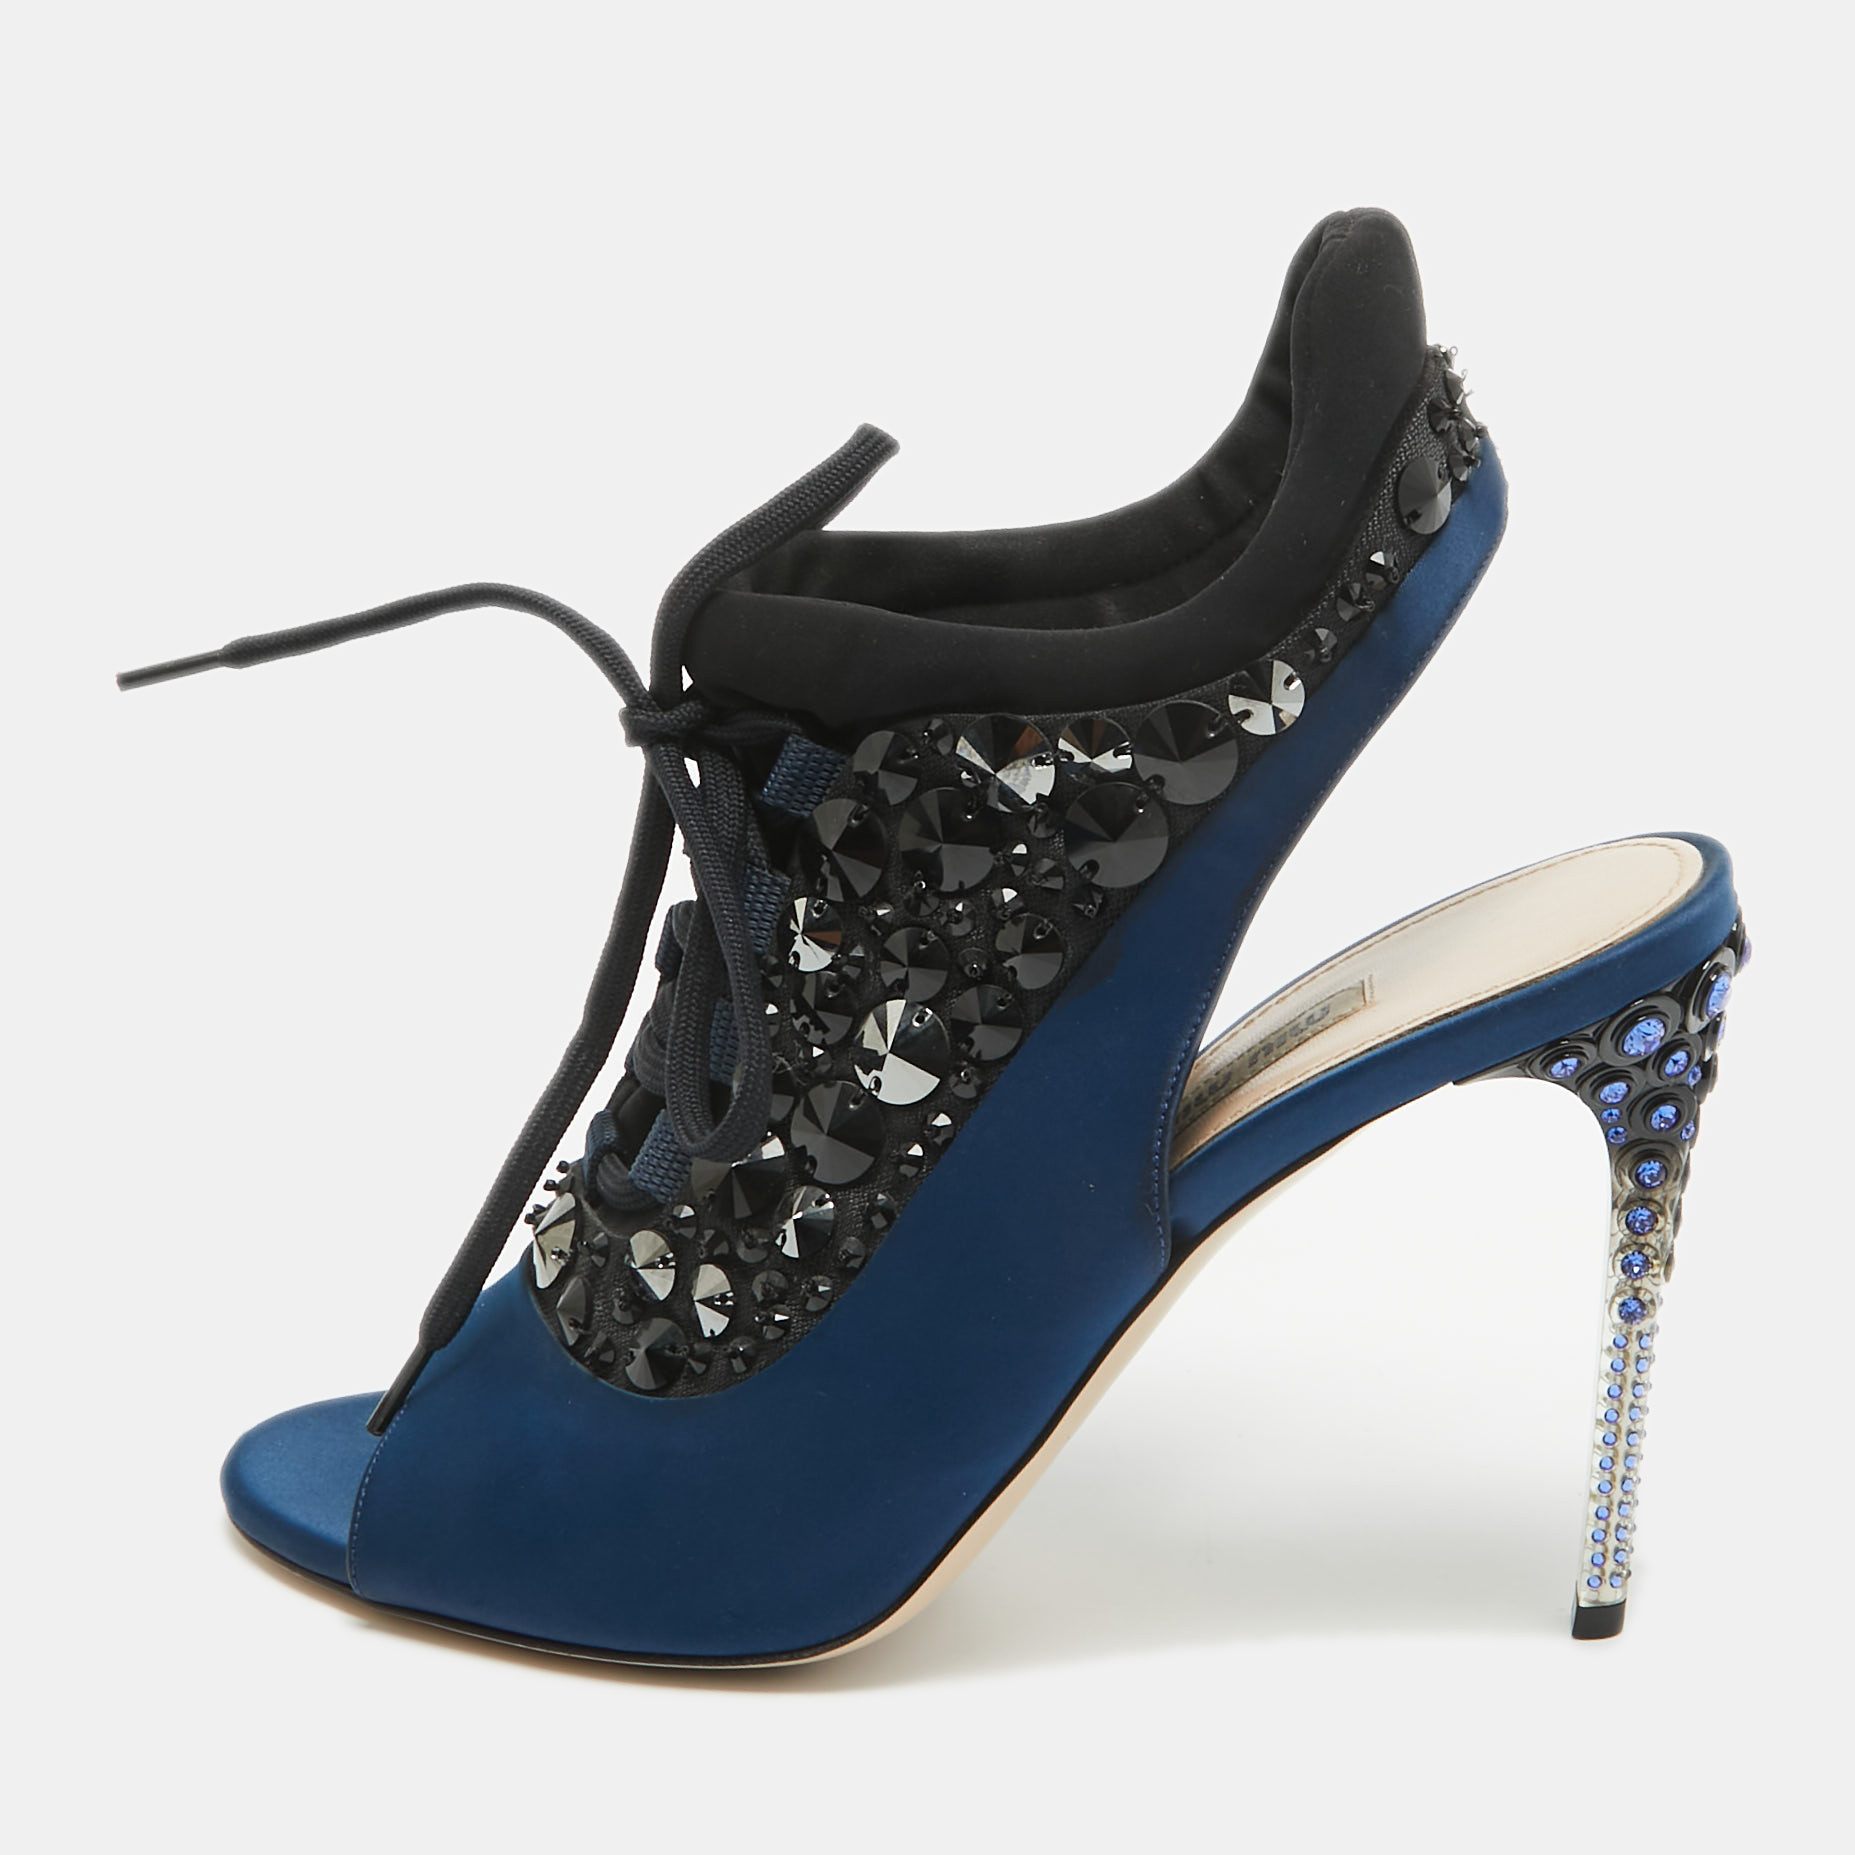 Miu miu navy blue/black satin and fabric crystal embellished lace up slingback sandals size 39.5